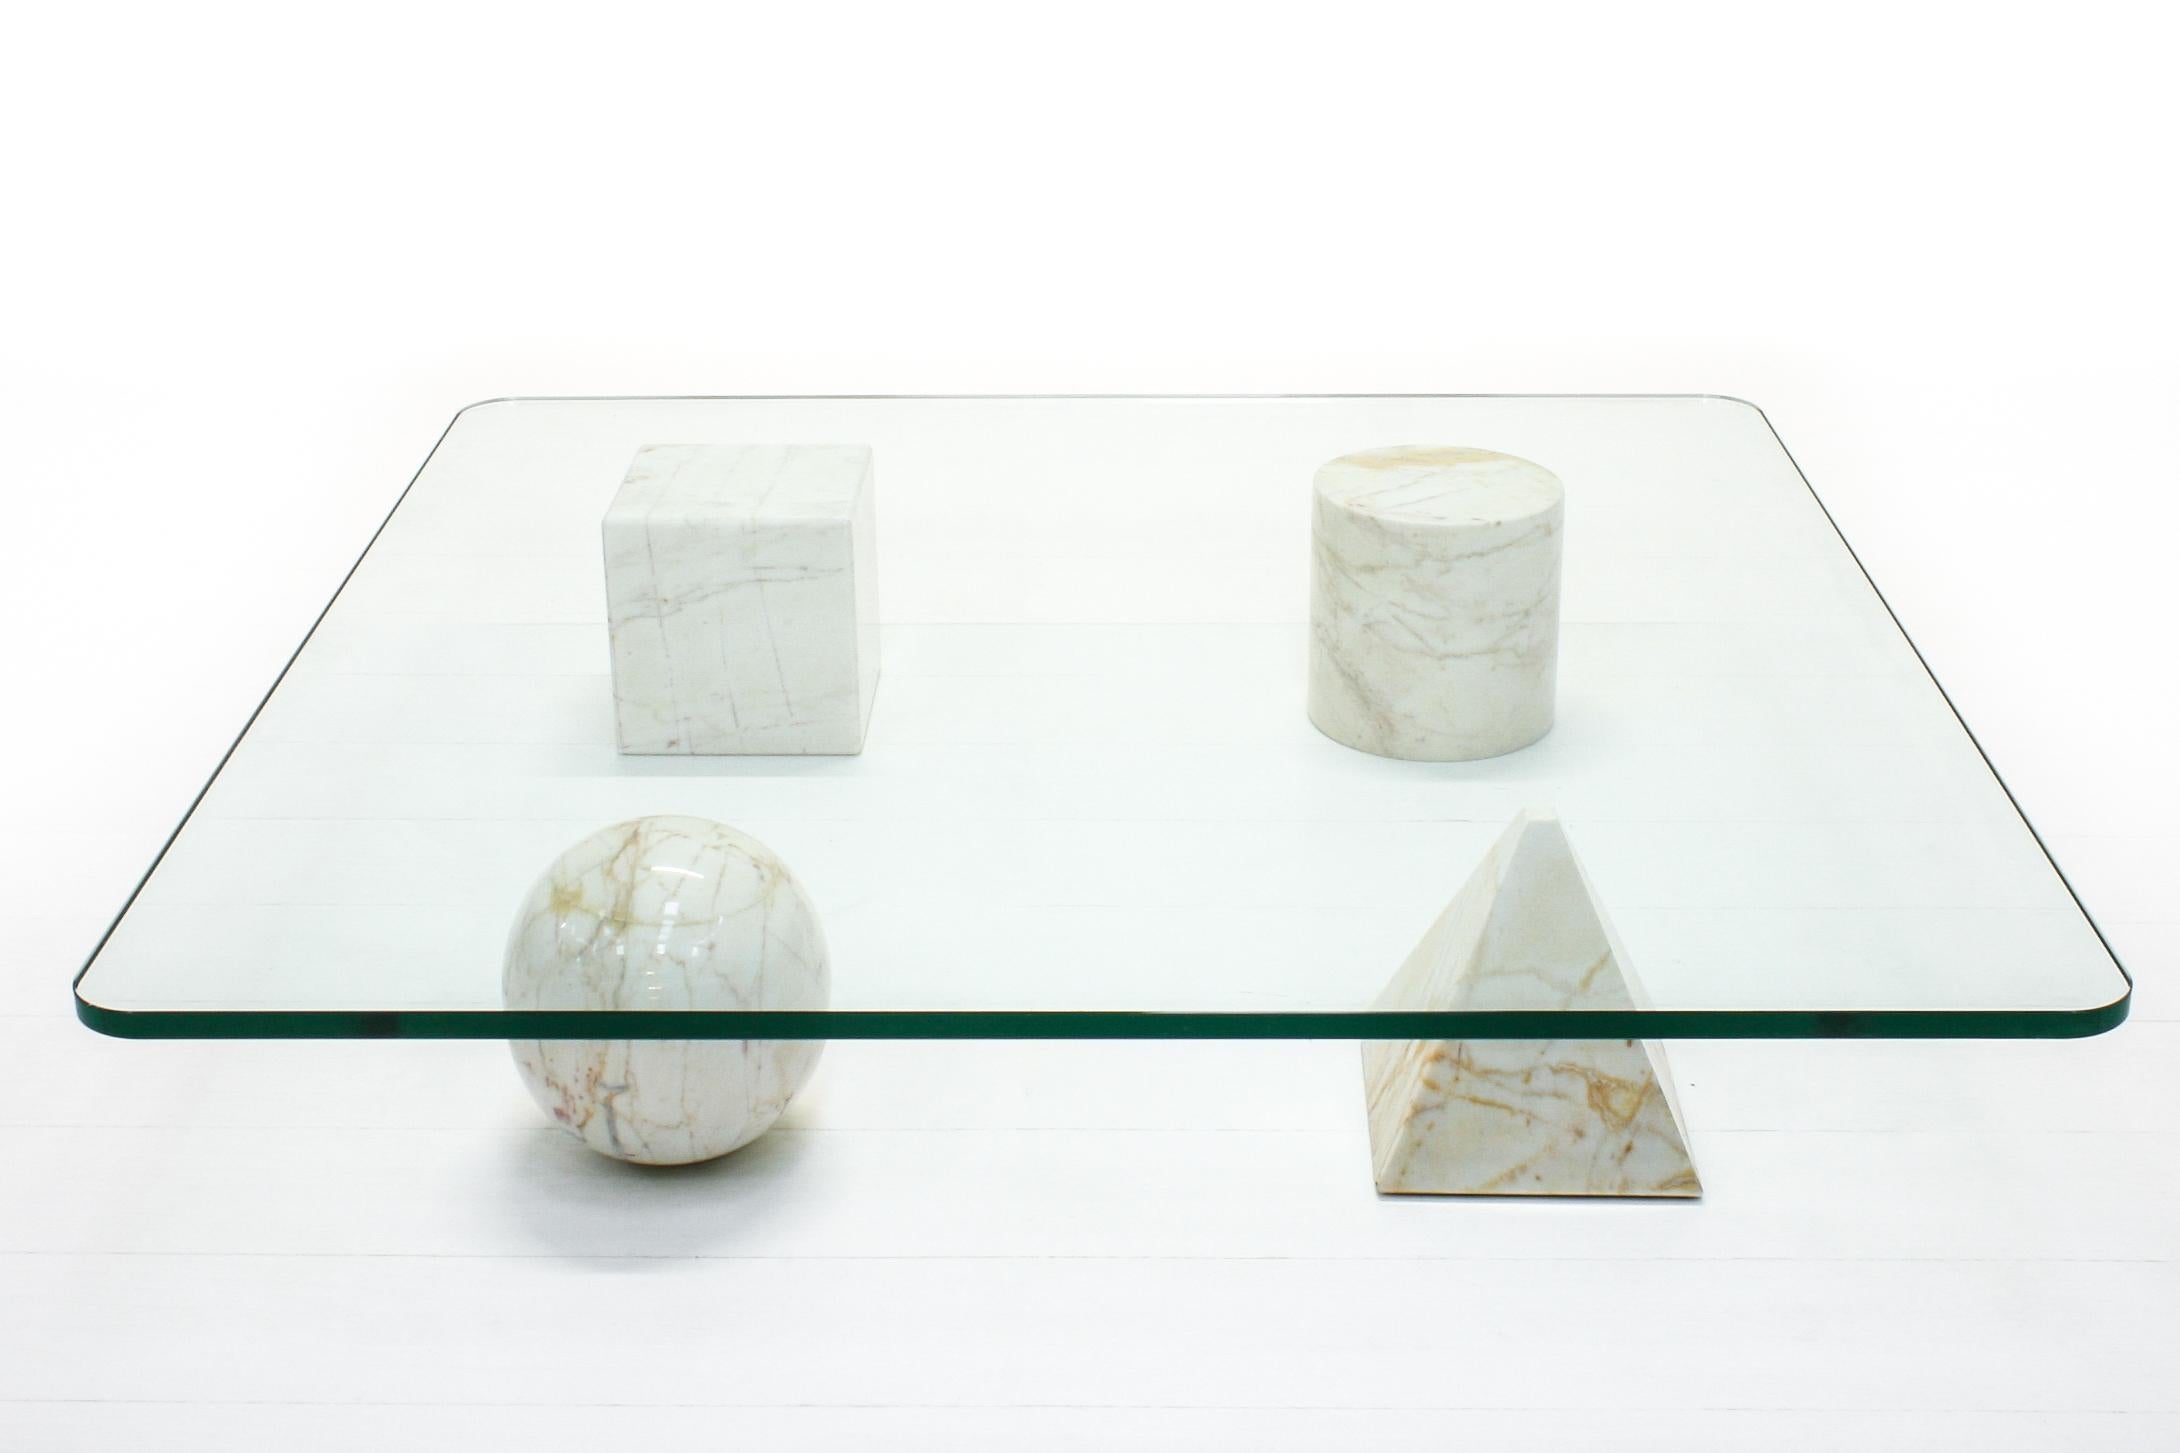 Designed in 1979 by Massimo and Lella Vignelli, this coffee table consists of a heavy glass top and four geometric figures that serve as feet - these are entirely in marble. They can be arranged at will.